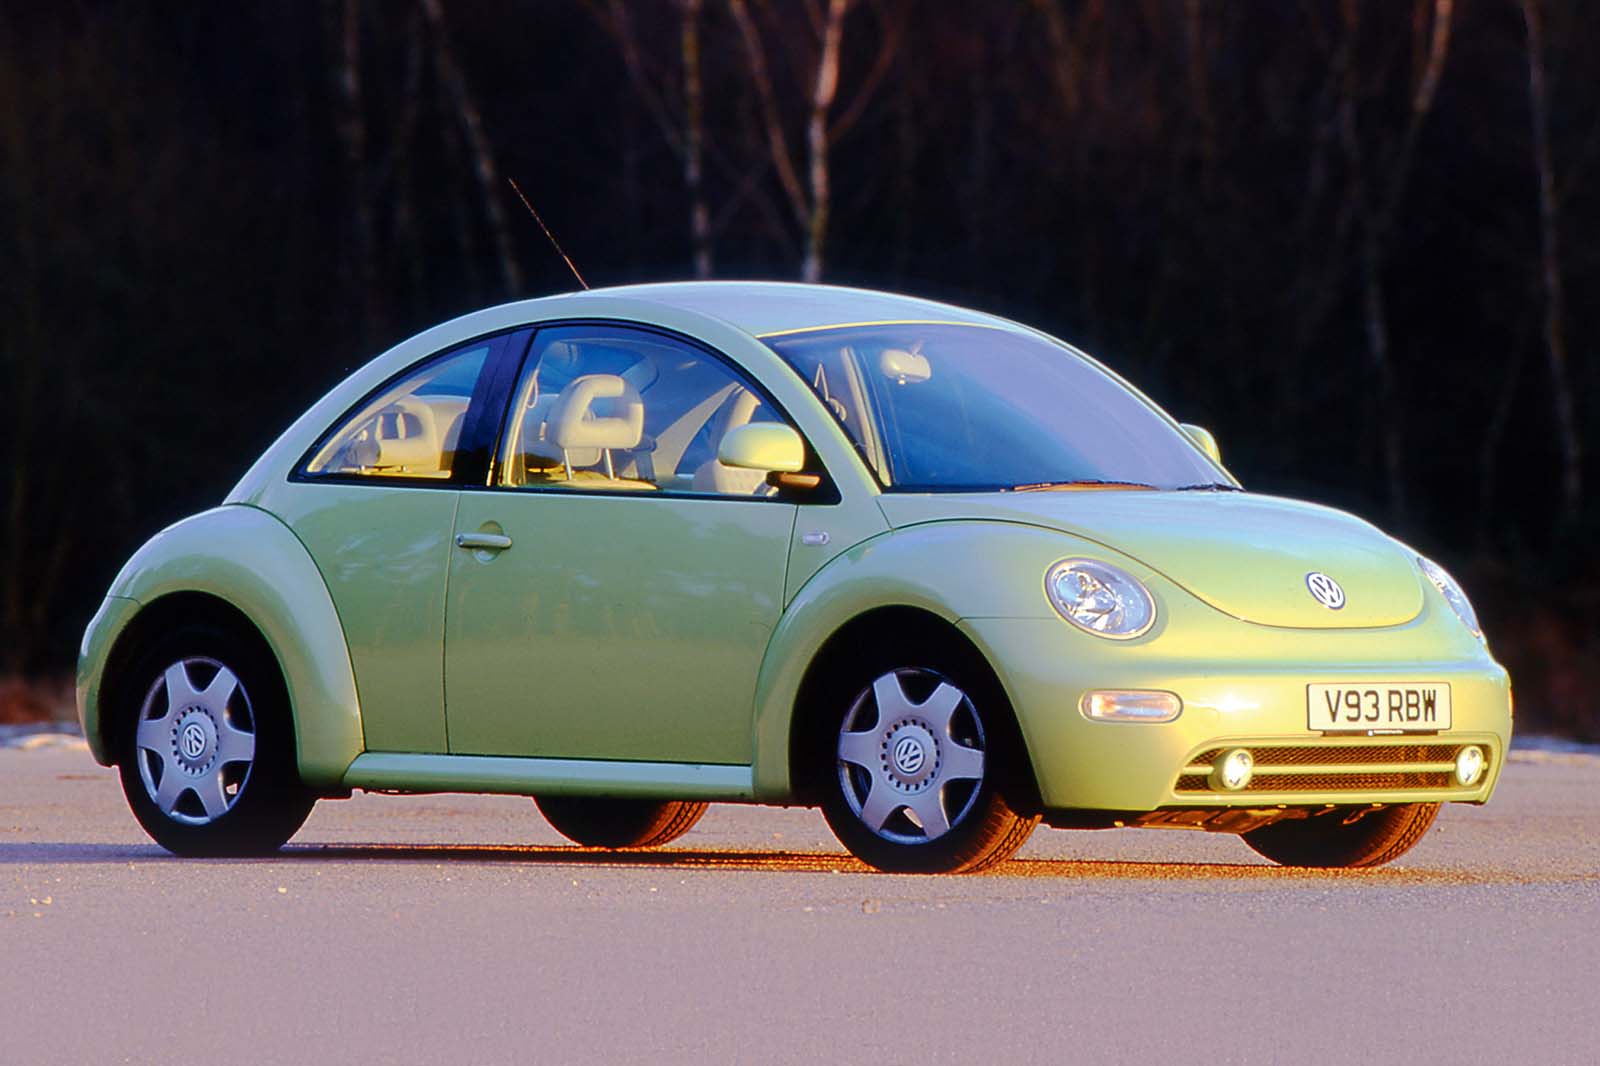 https://www.autocar.co.uk/sites/autocar.co.uk/files/images/car-reviews/first-drives/legacy/volkswagen-beetle-front-three-quarter.jpg